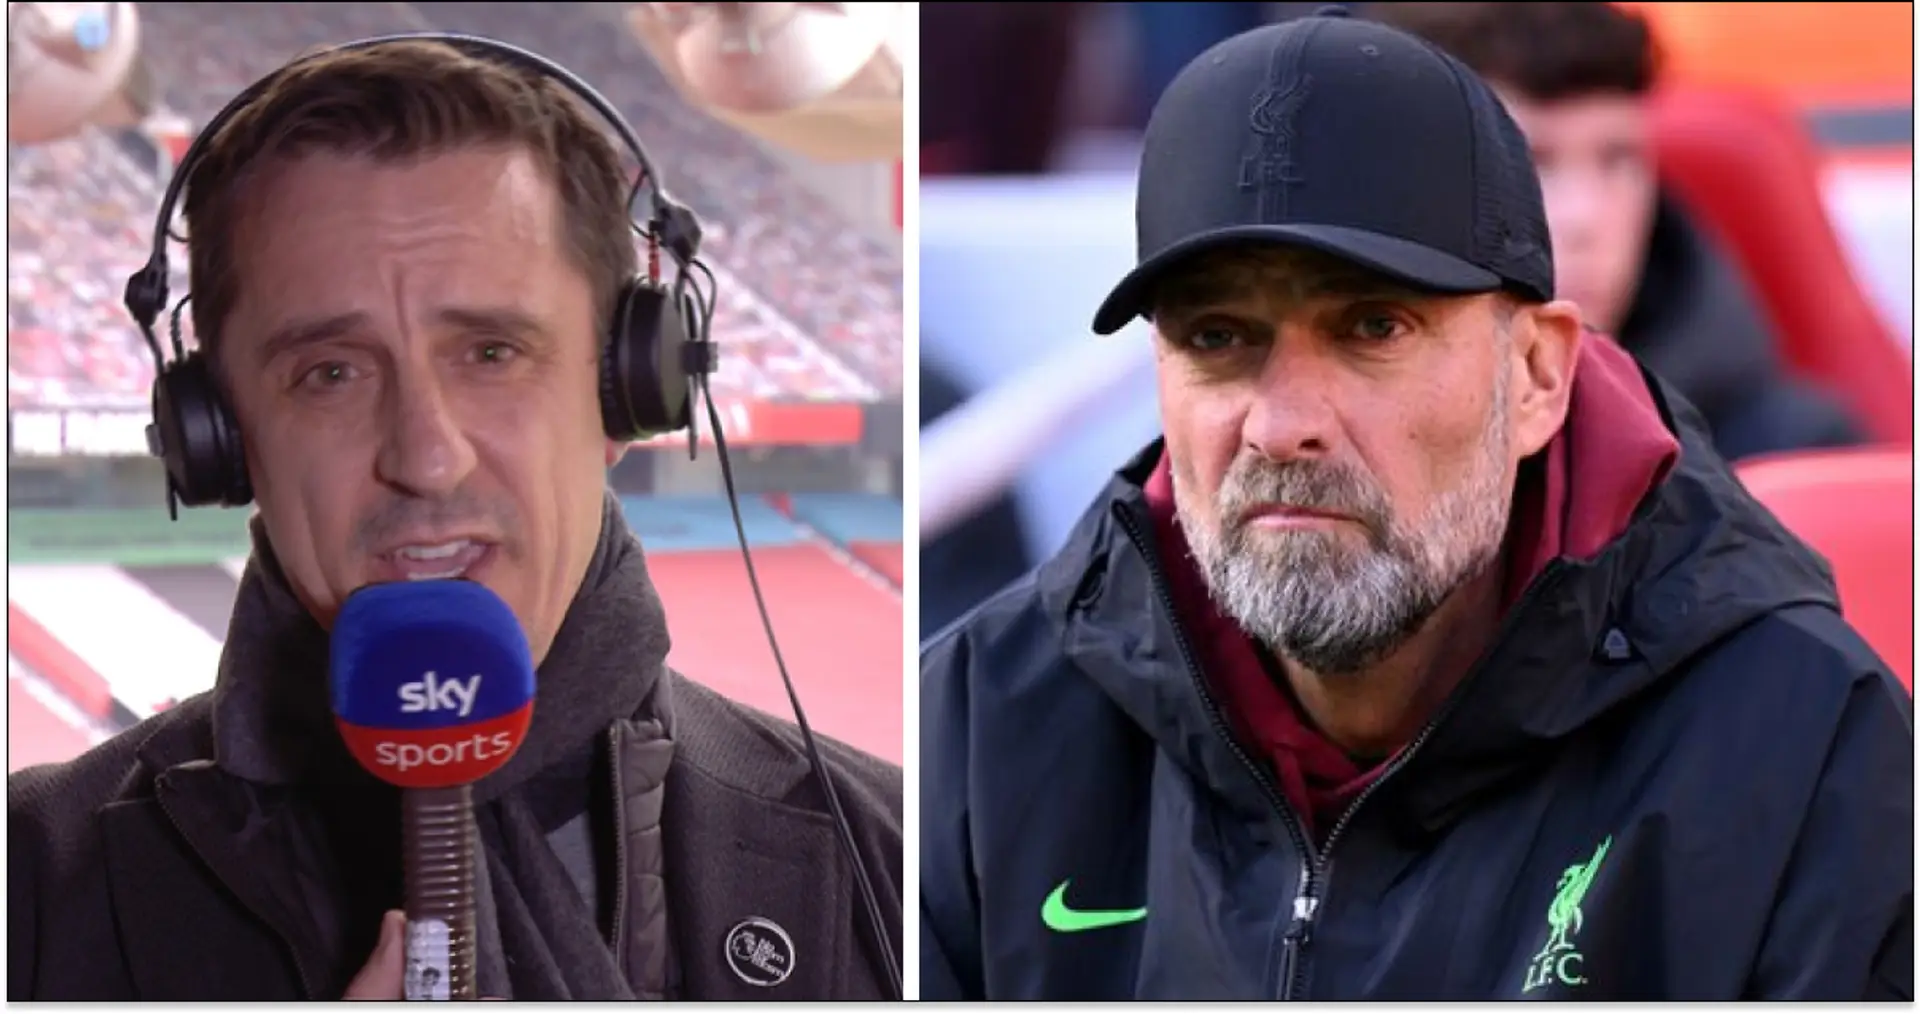 Did Liverpool 'bottle' this season? Gary Neville shares his take